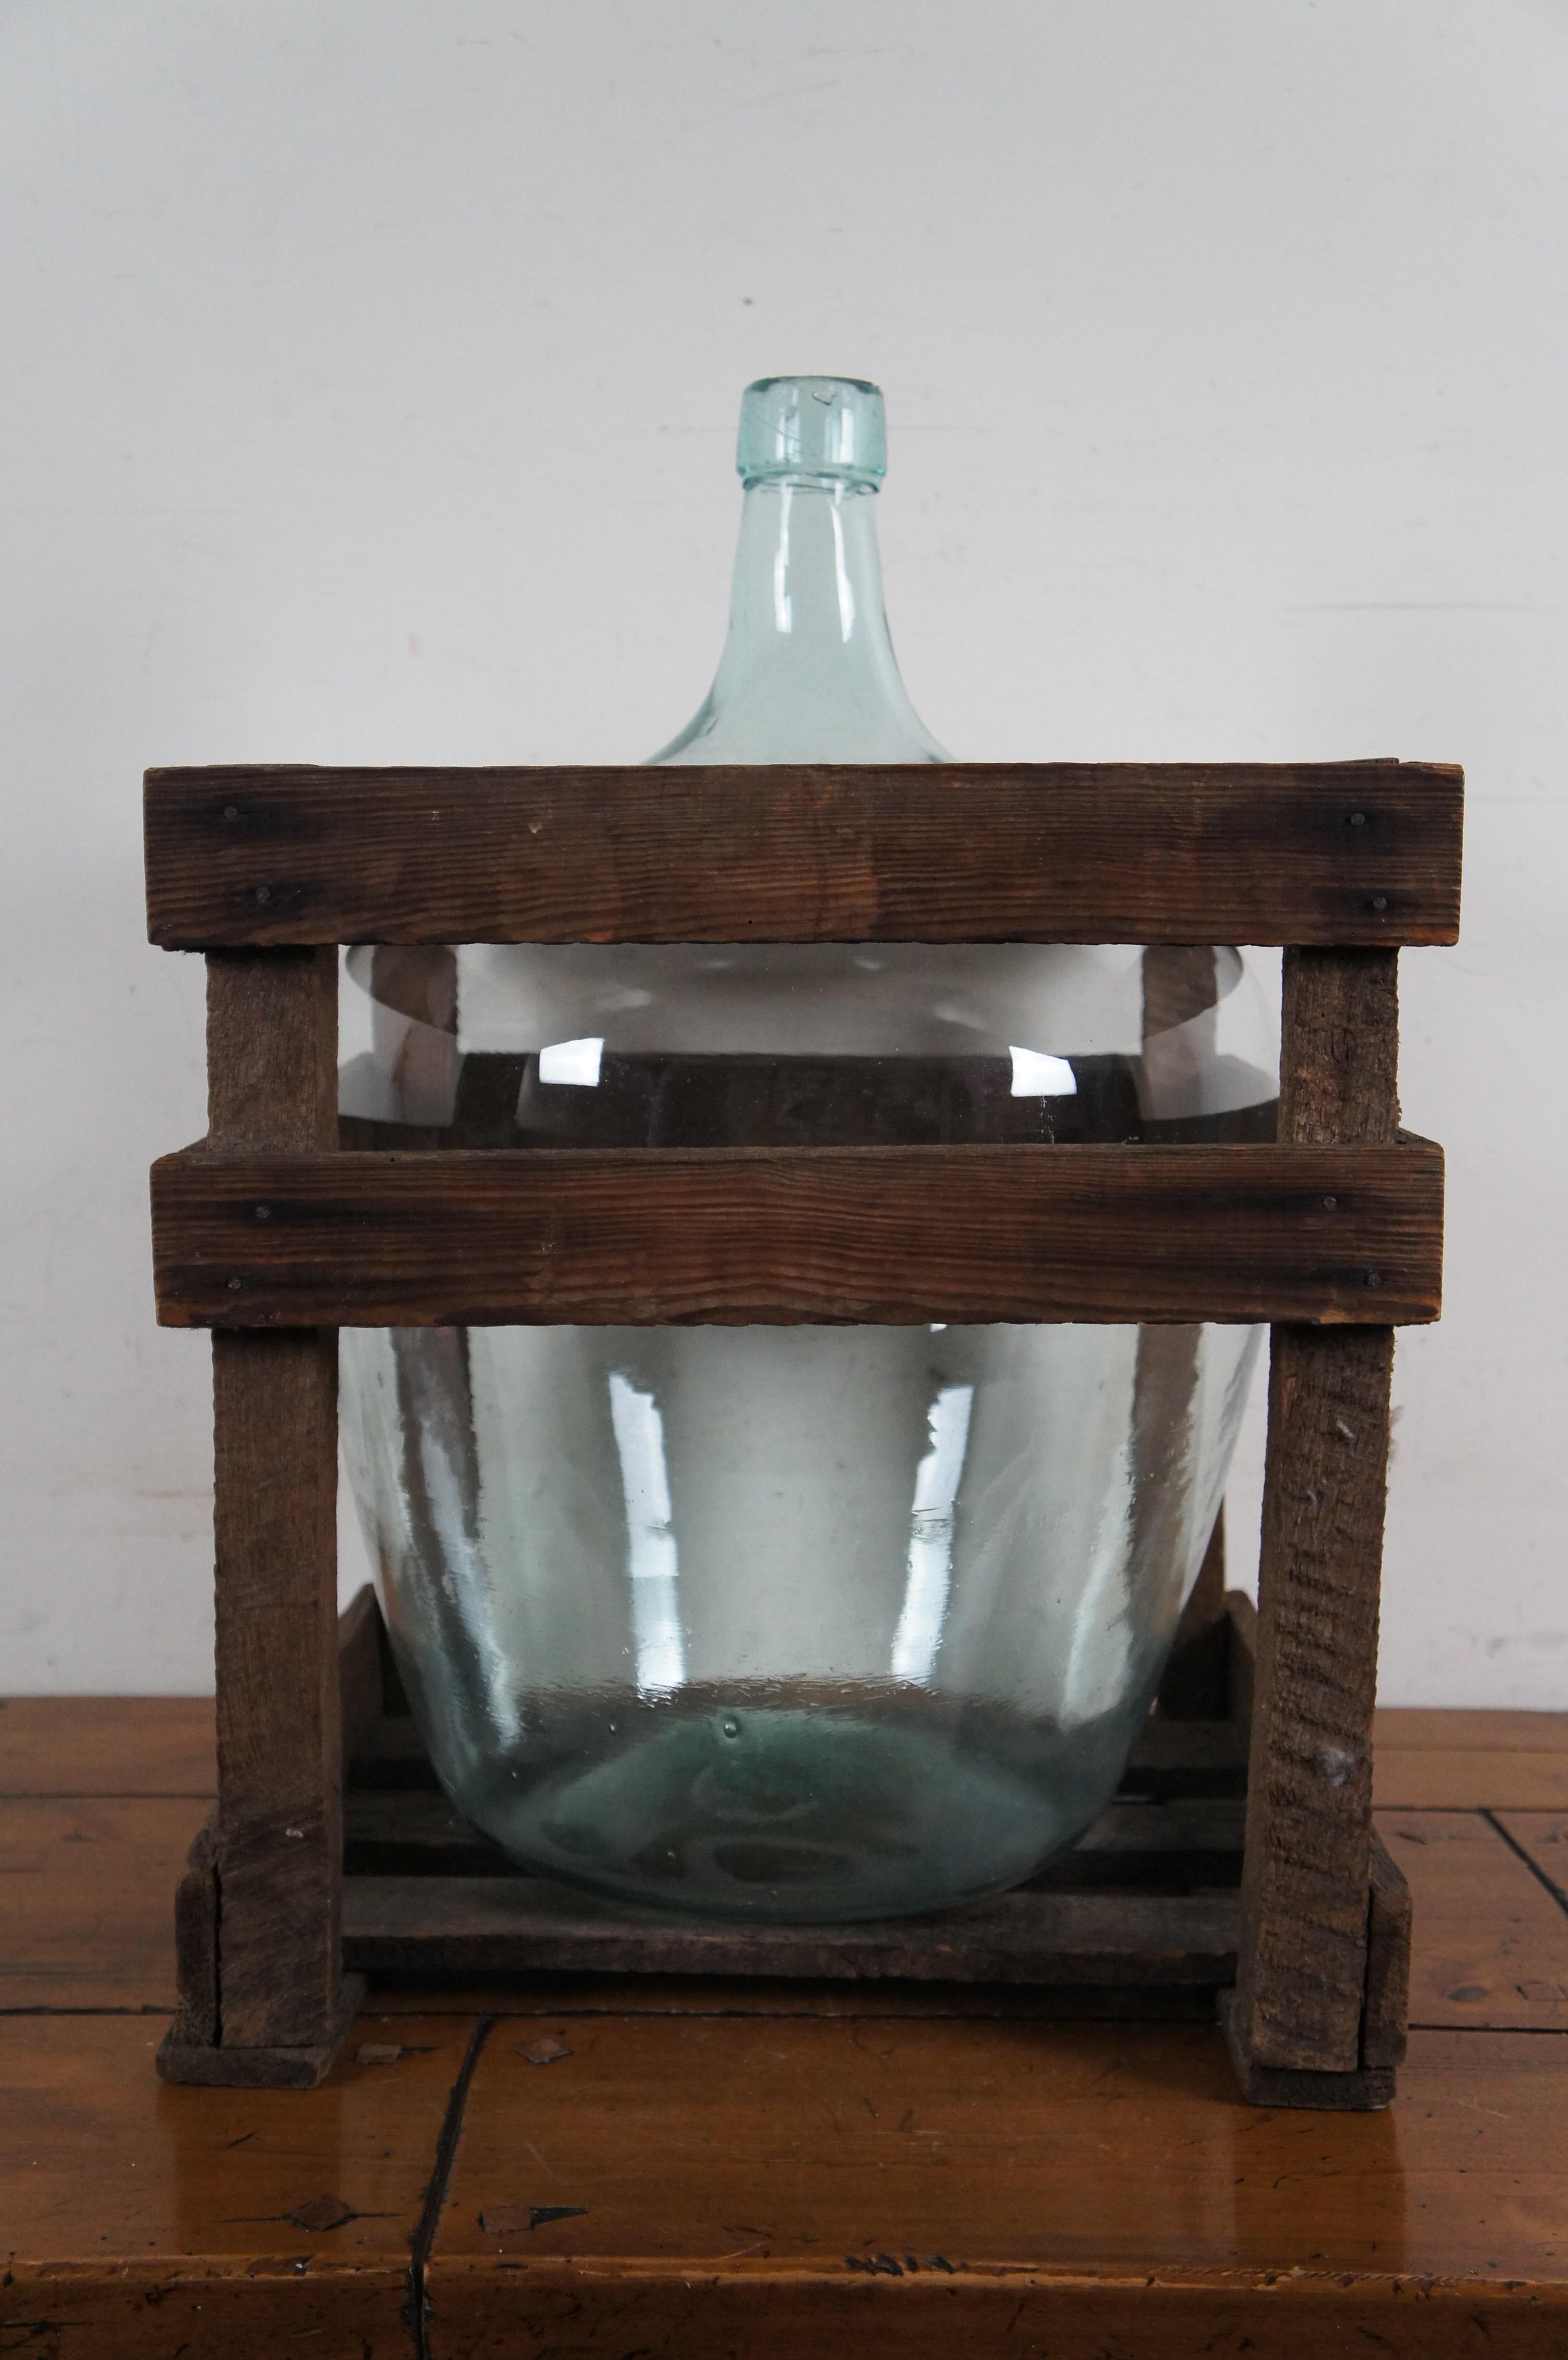 Antique French Hand Blown Glass Demijohn Wine Bottle Jug & Wood Crate 22